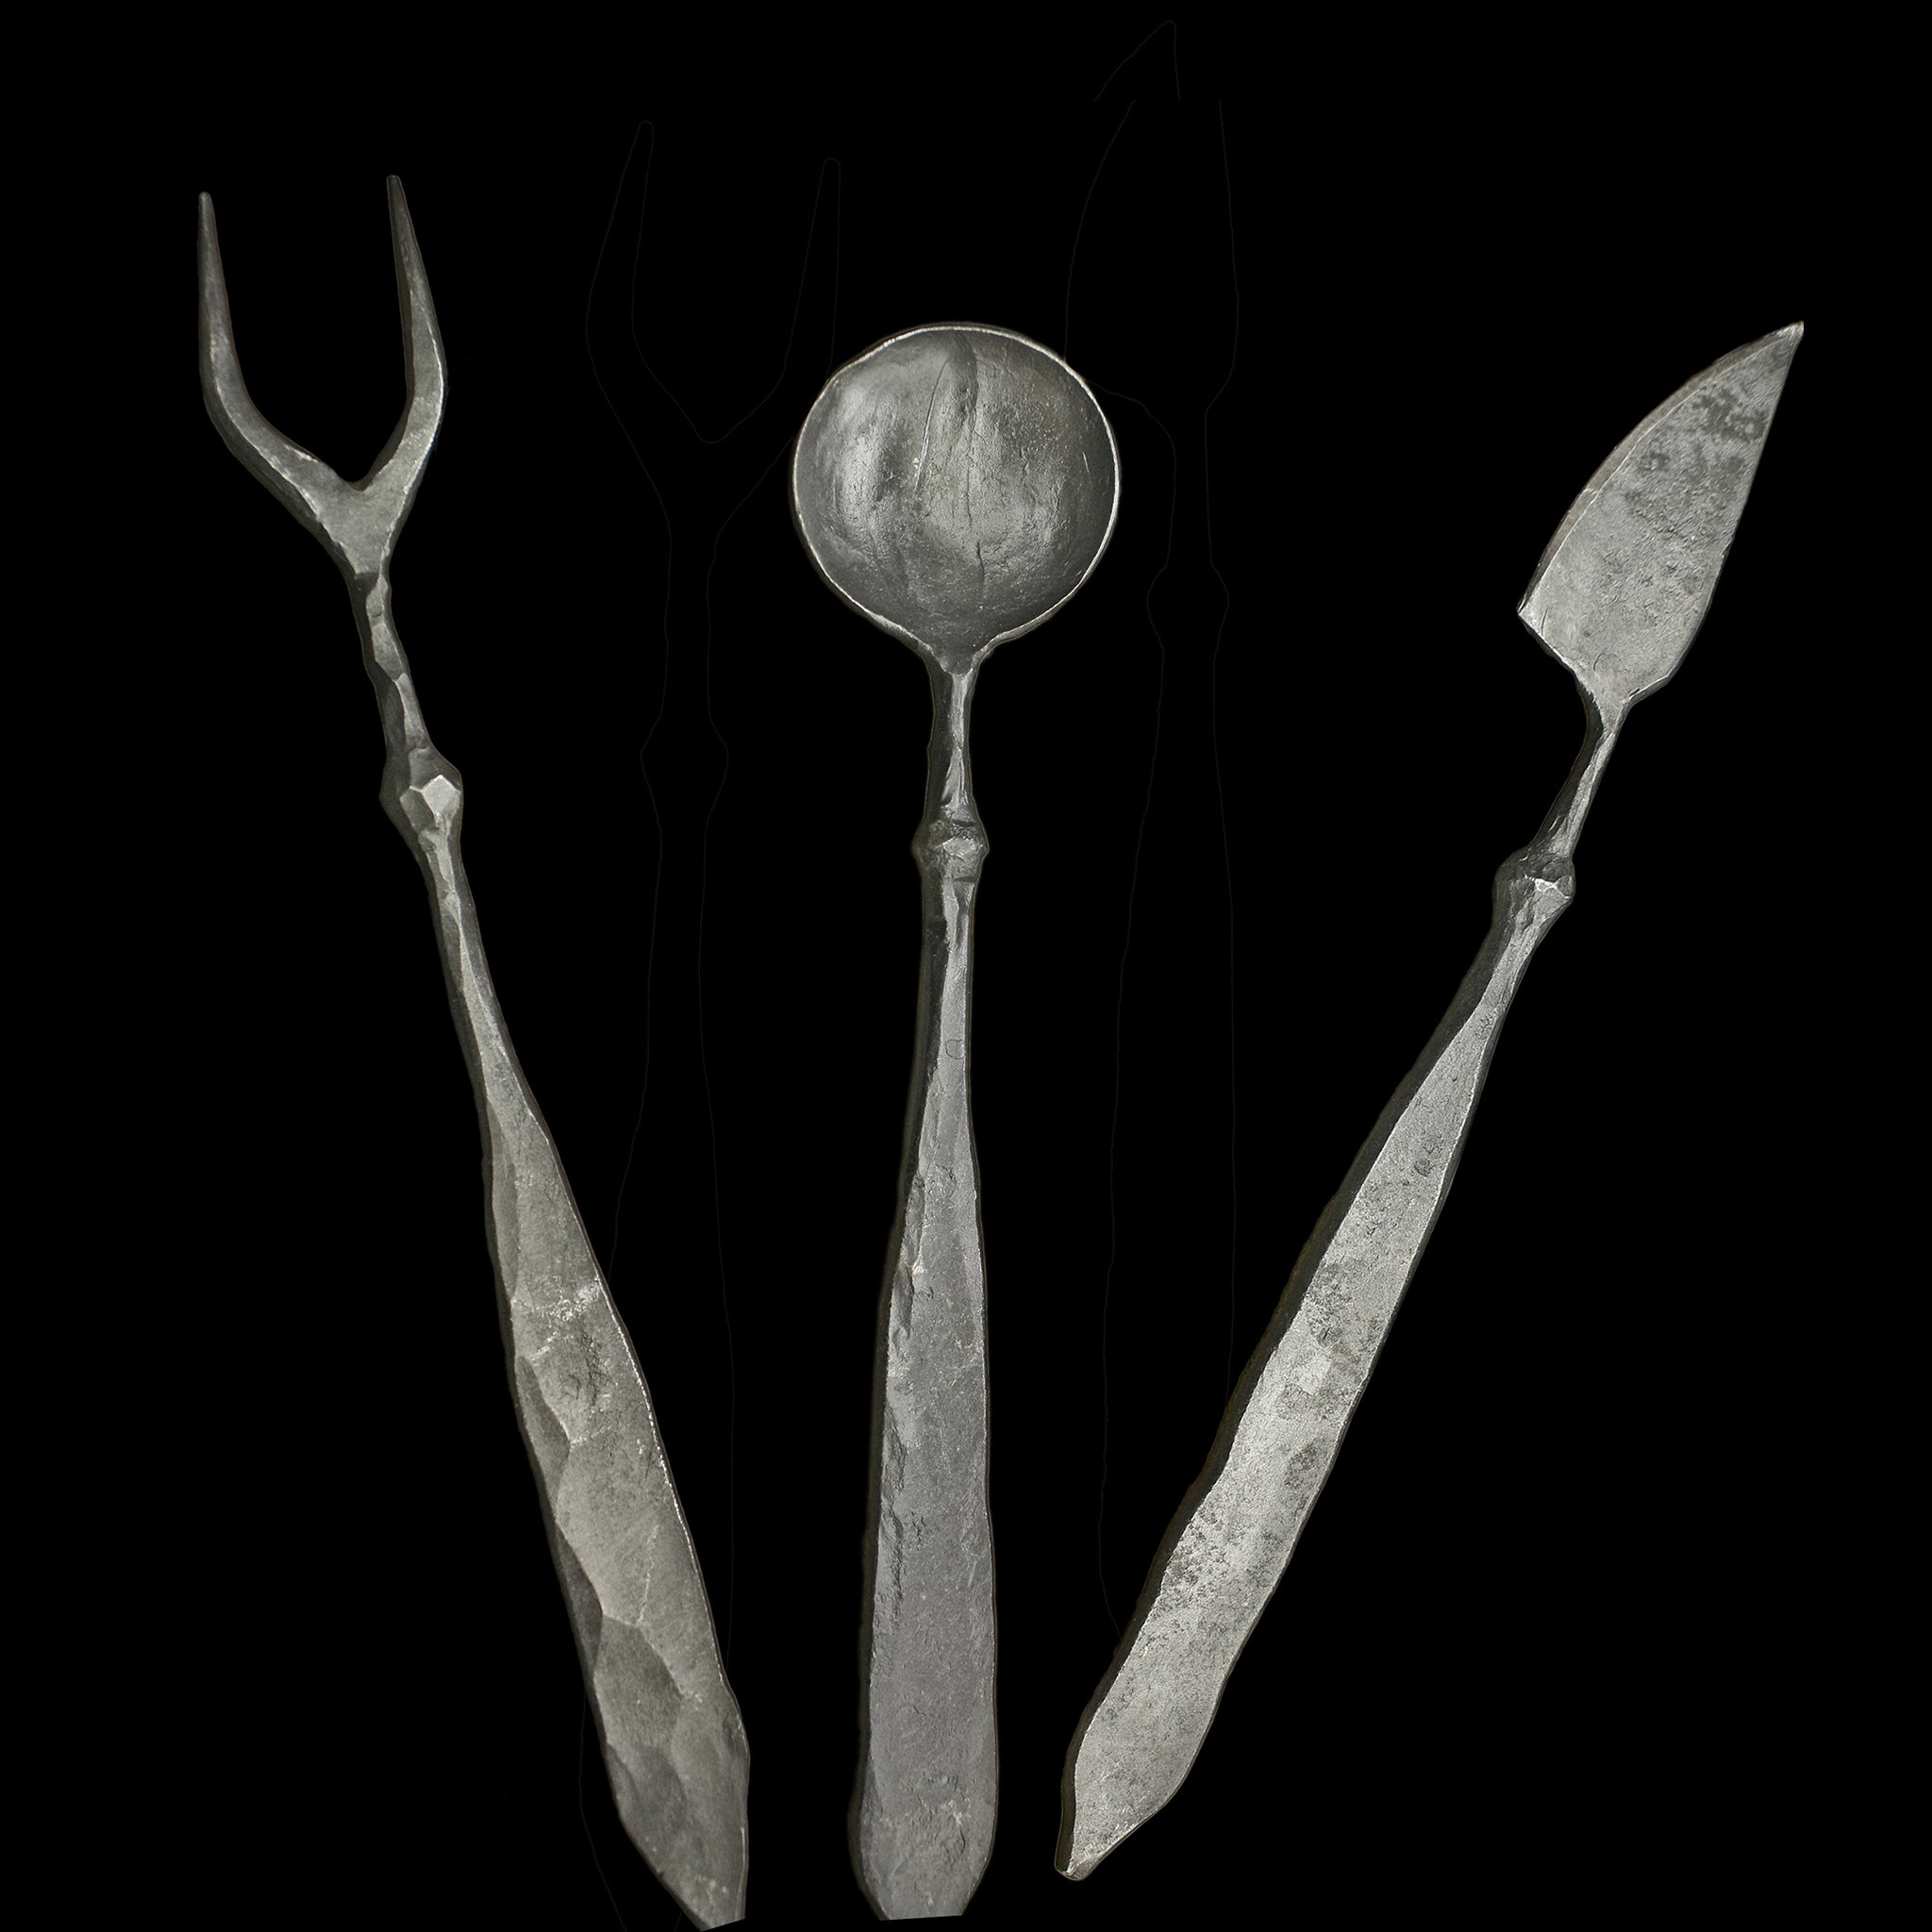 Hand-Forged Iron Medieval Banquet Set - Spoon, Fork, Knife